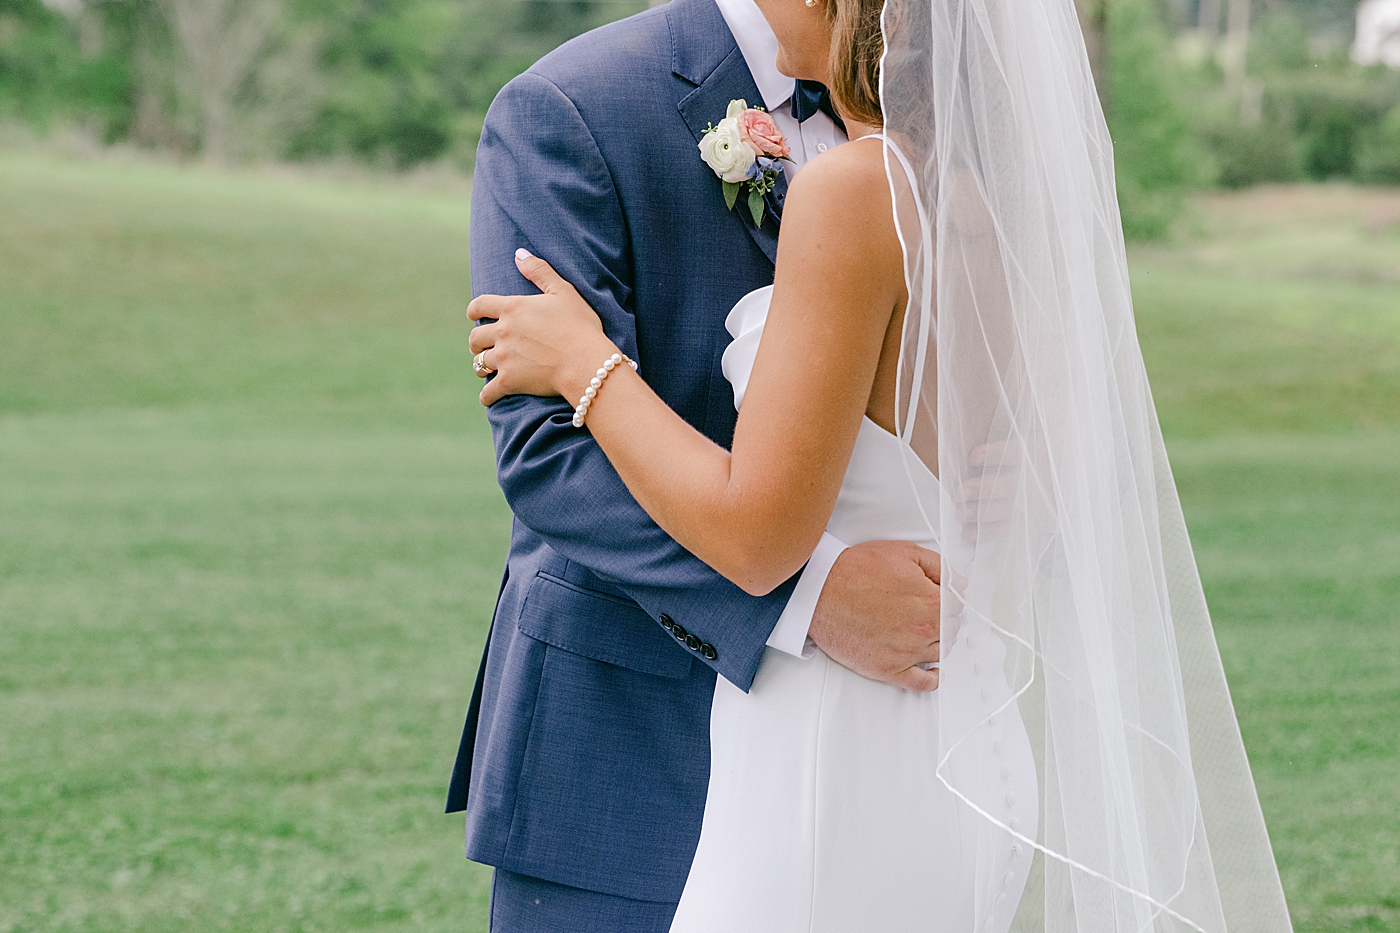 Detail of bride and groom embracing | Image by Hope Helmuth Photography